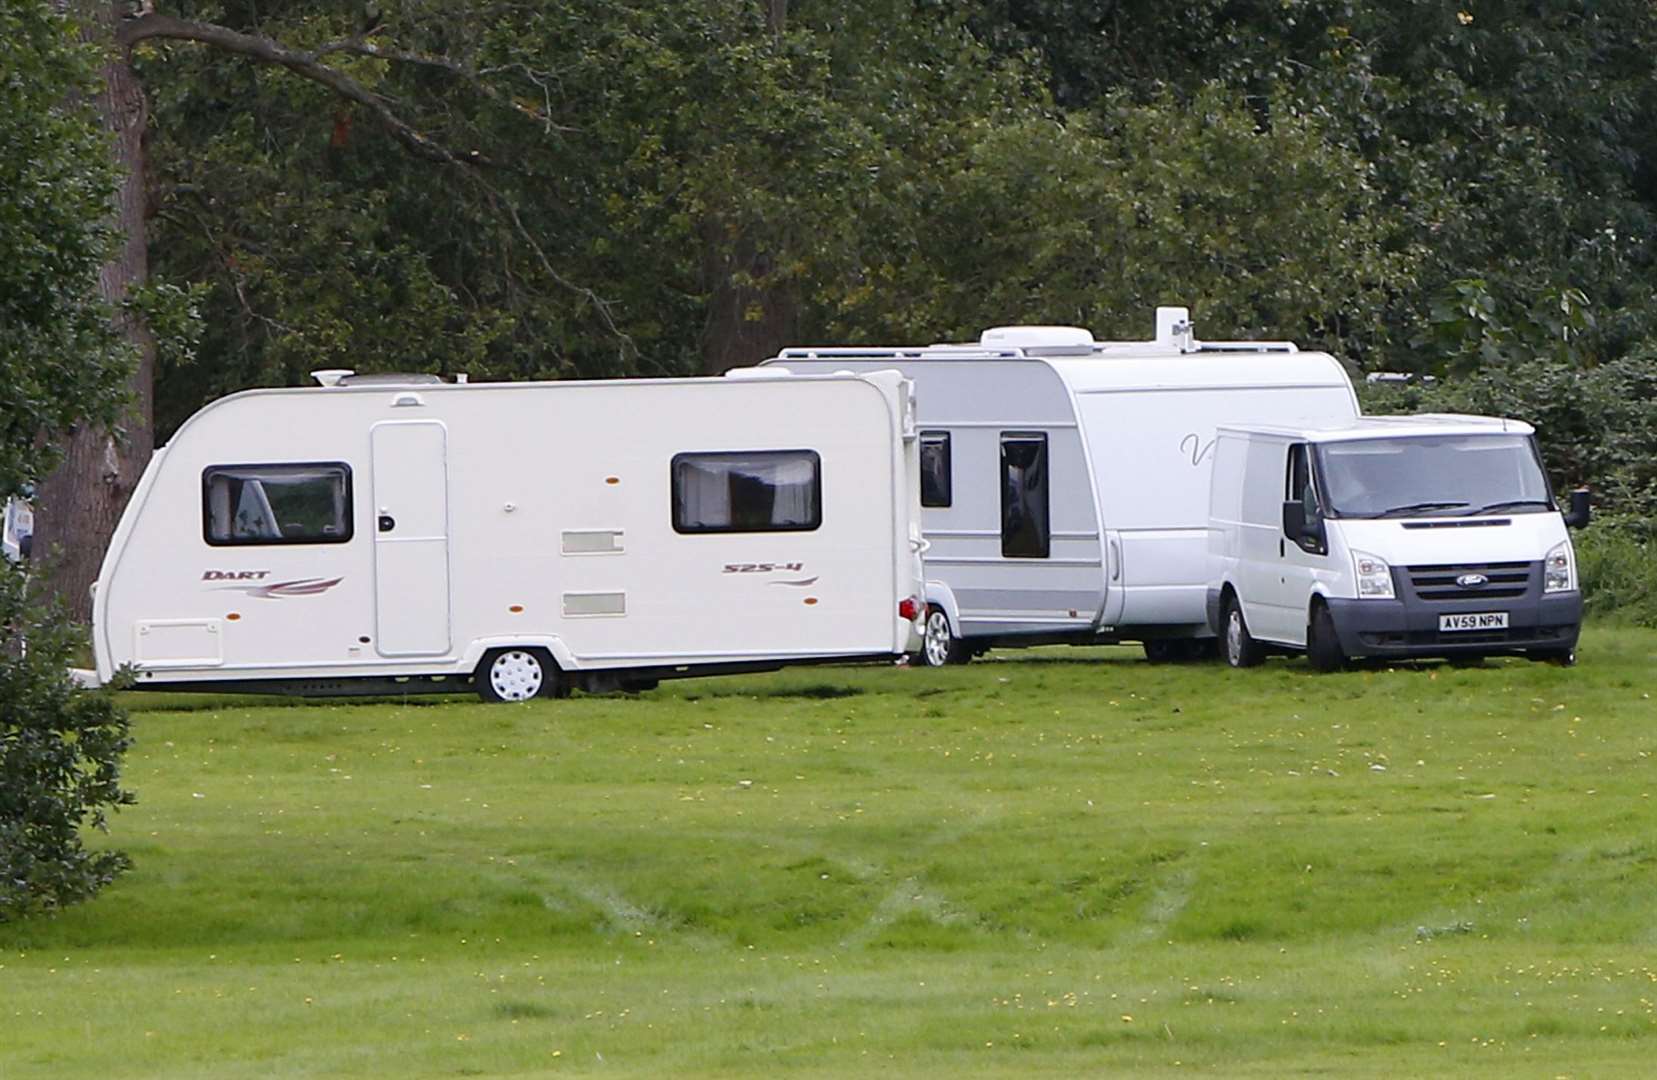 A consultation about when and where gypsies and travellers should have accommodation is being launched by Maidstone Borough Council. Picture: Andy Jones